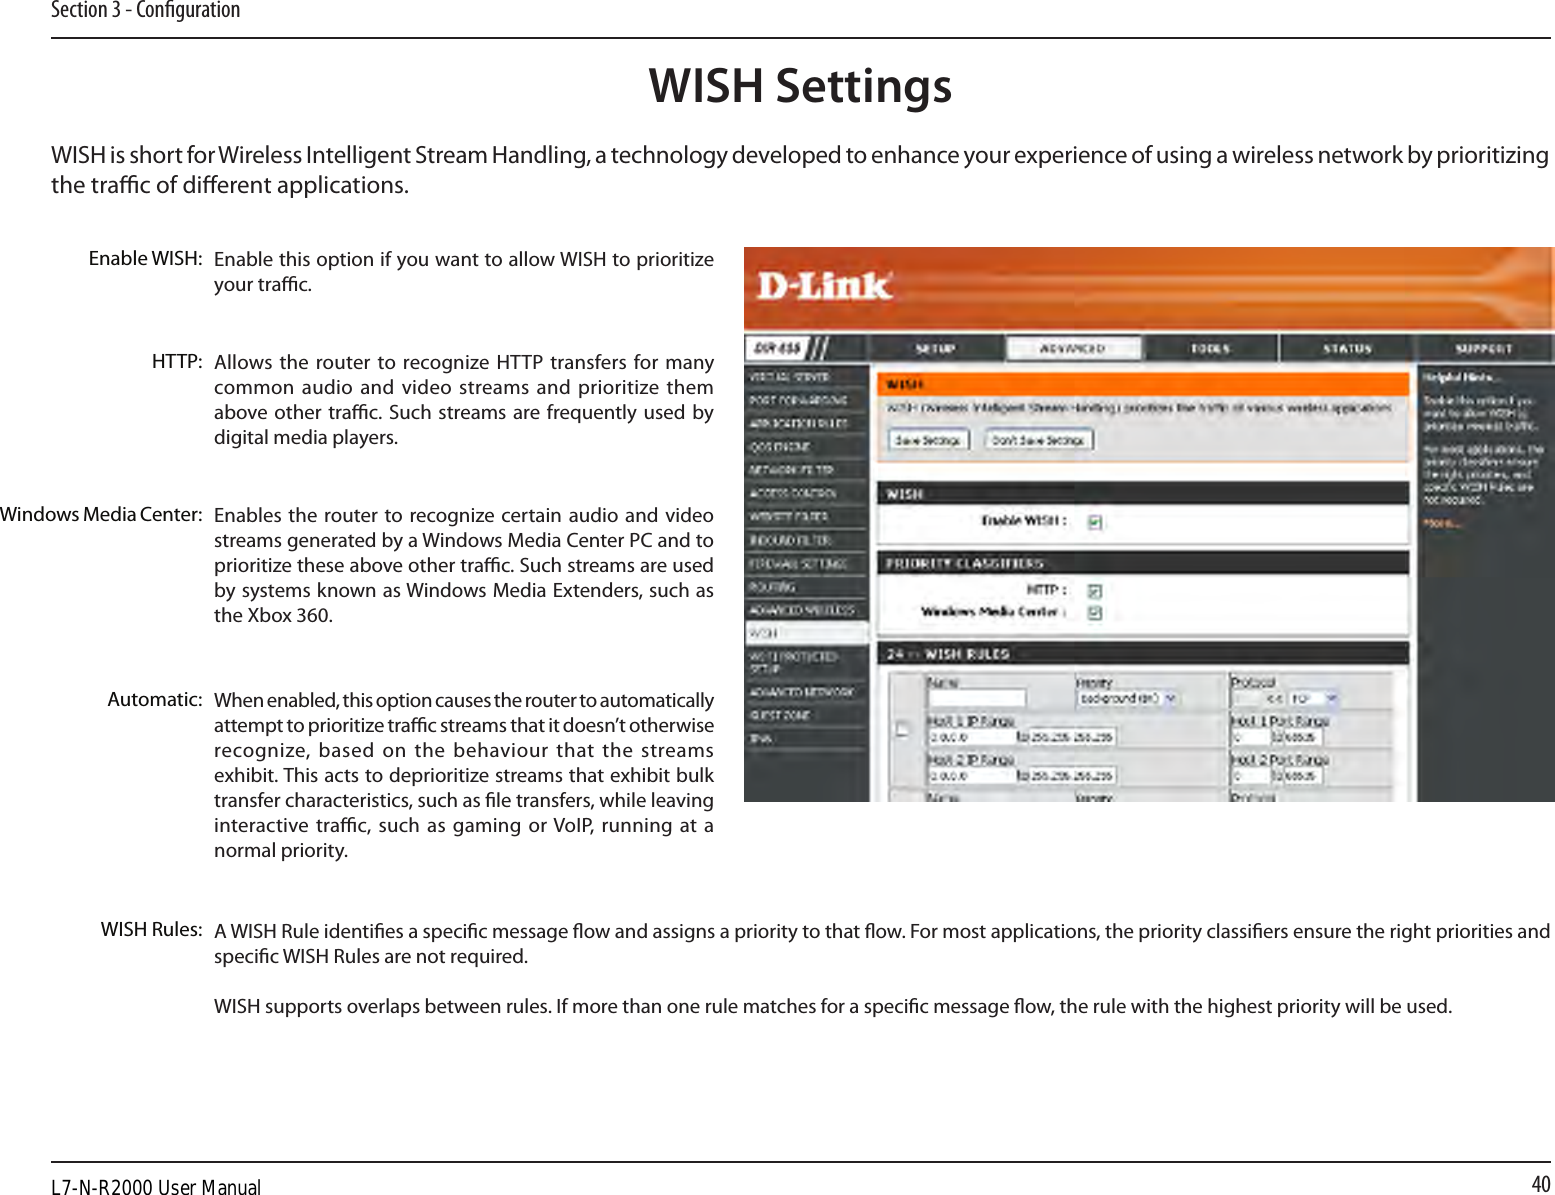 40Section 3 - CongurationWISH is short for Wireless Intelligent Stream Handling, a technology developed to enhance your experience of using a wireless network by prioritizing the trac of dierent applications. Enable this option if you want to allow WISH to prioritize your trac. Enable WISH:Allows the router to recognize HTTP  transfers for many common audio  and video streams and prioritize them above other trac. Such streams are frequently used  by digital media players. HTTP:Enables the  router to recognize certain audio and  video streams generated by a Windows Media Center PC and to prioritize these above other trac. Such streams are used by systems known as Windows Media Extenders, such as the Xbox 360. Windows Media Center:When enabled, this option causes the router to automatically attempt to prioritize trac streams that it doesn’t otherwise recognize, based on  the  behaviour that  the  streams exhibit. This acts to deprioritize streams that exhibit bulk transfer characteristics, such as le transfers, while leaving interactive trac, such  as gaming or VoIP,  running  at a normal priority.Automatic:WISH Rules: A WISH Rule identies a specic message ow and assigns a priority to that ow. For most applications, the priority classiers ensure the right priorities and specic WISH Rules are not required. WISH supports overlaps between rules. If more than one rule matches for a specic message ow, the rule with the highest priority will be used. WISH SettingsL7-N-R2000 User Manual